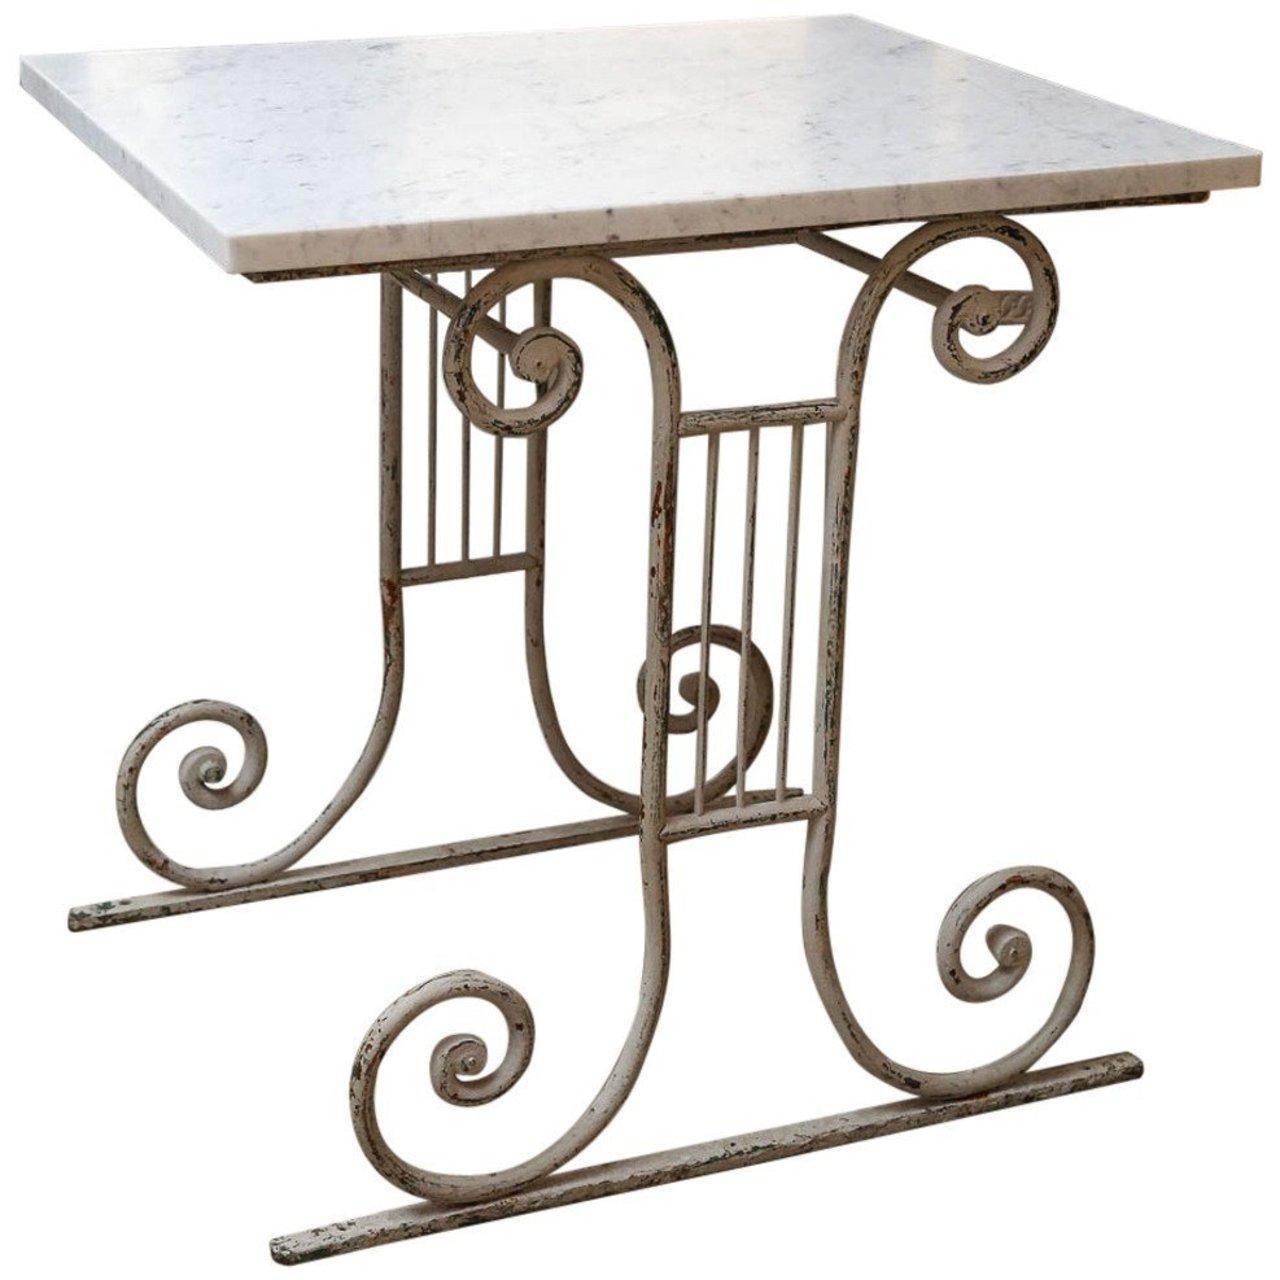 Marble-Top White-Painted Iron Base Table 1